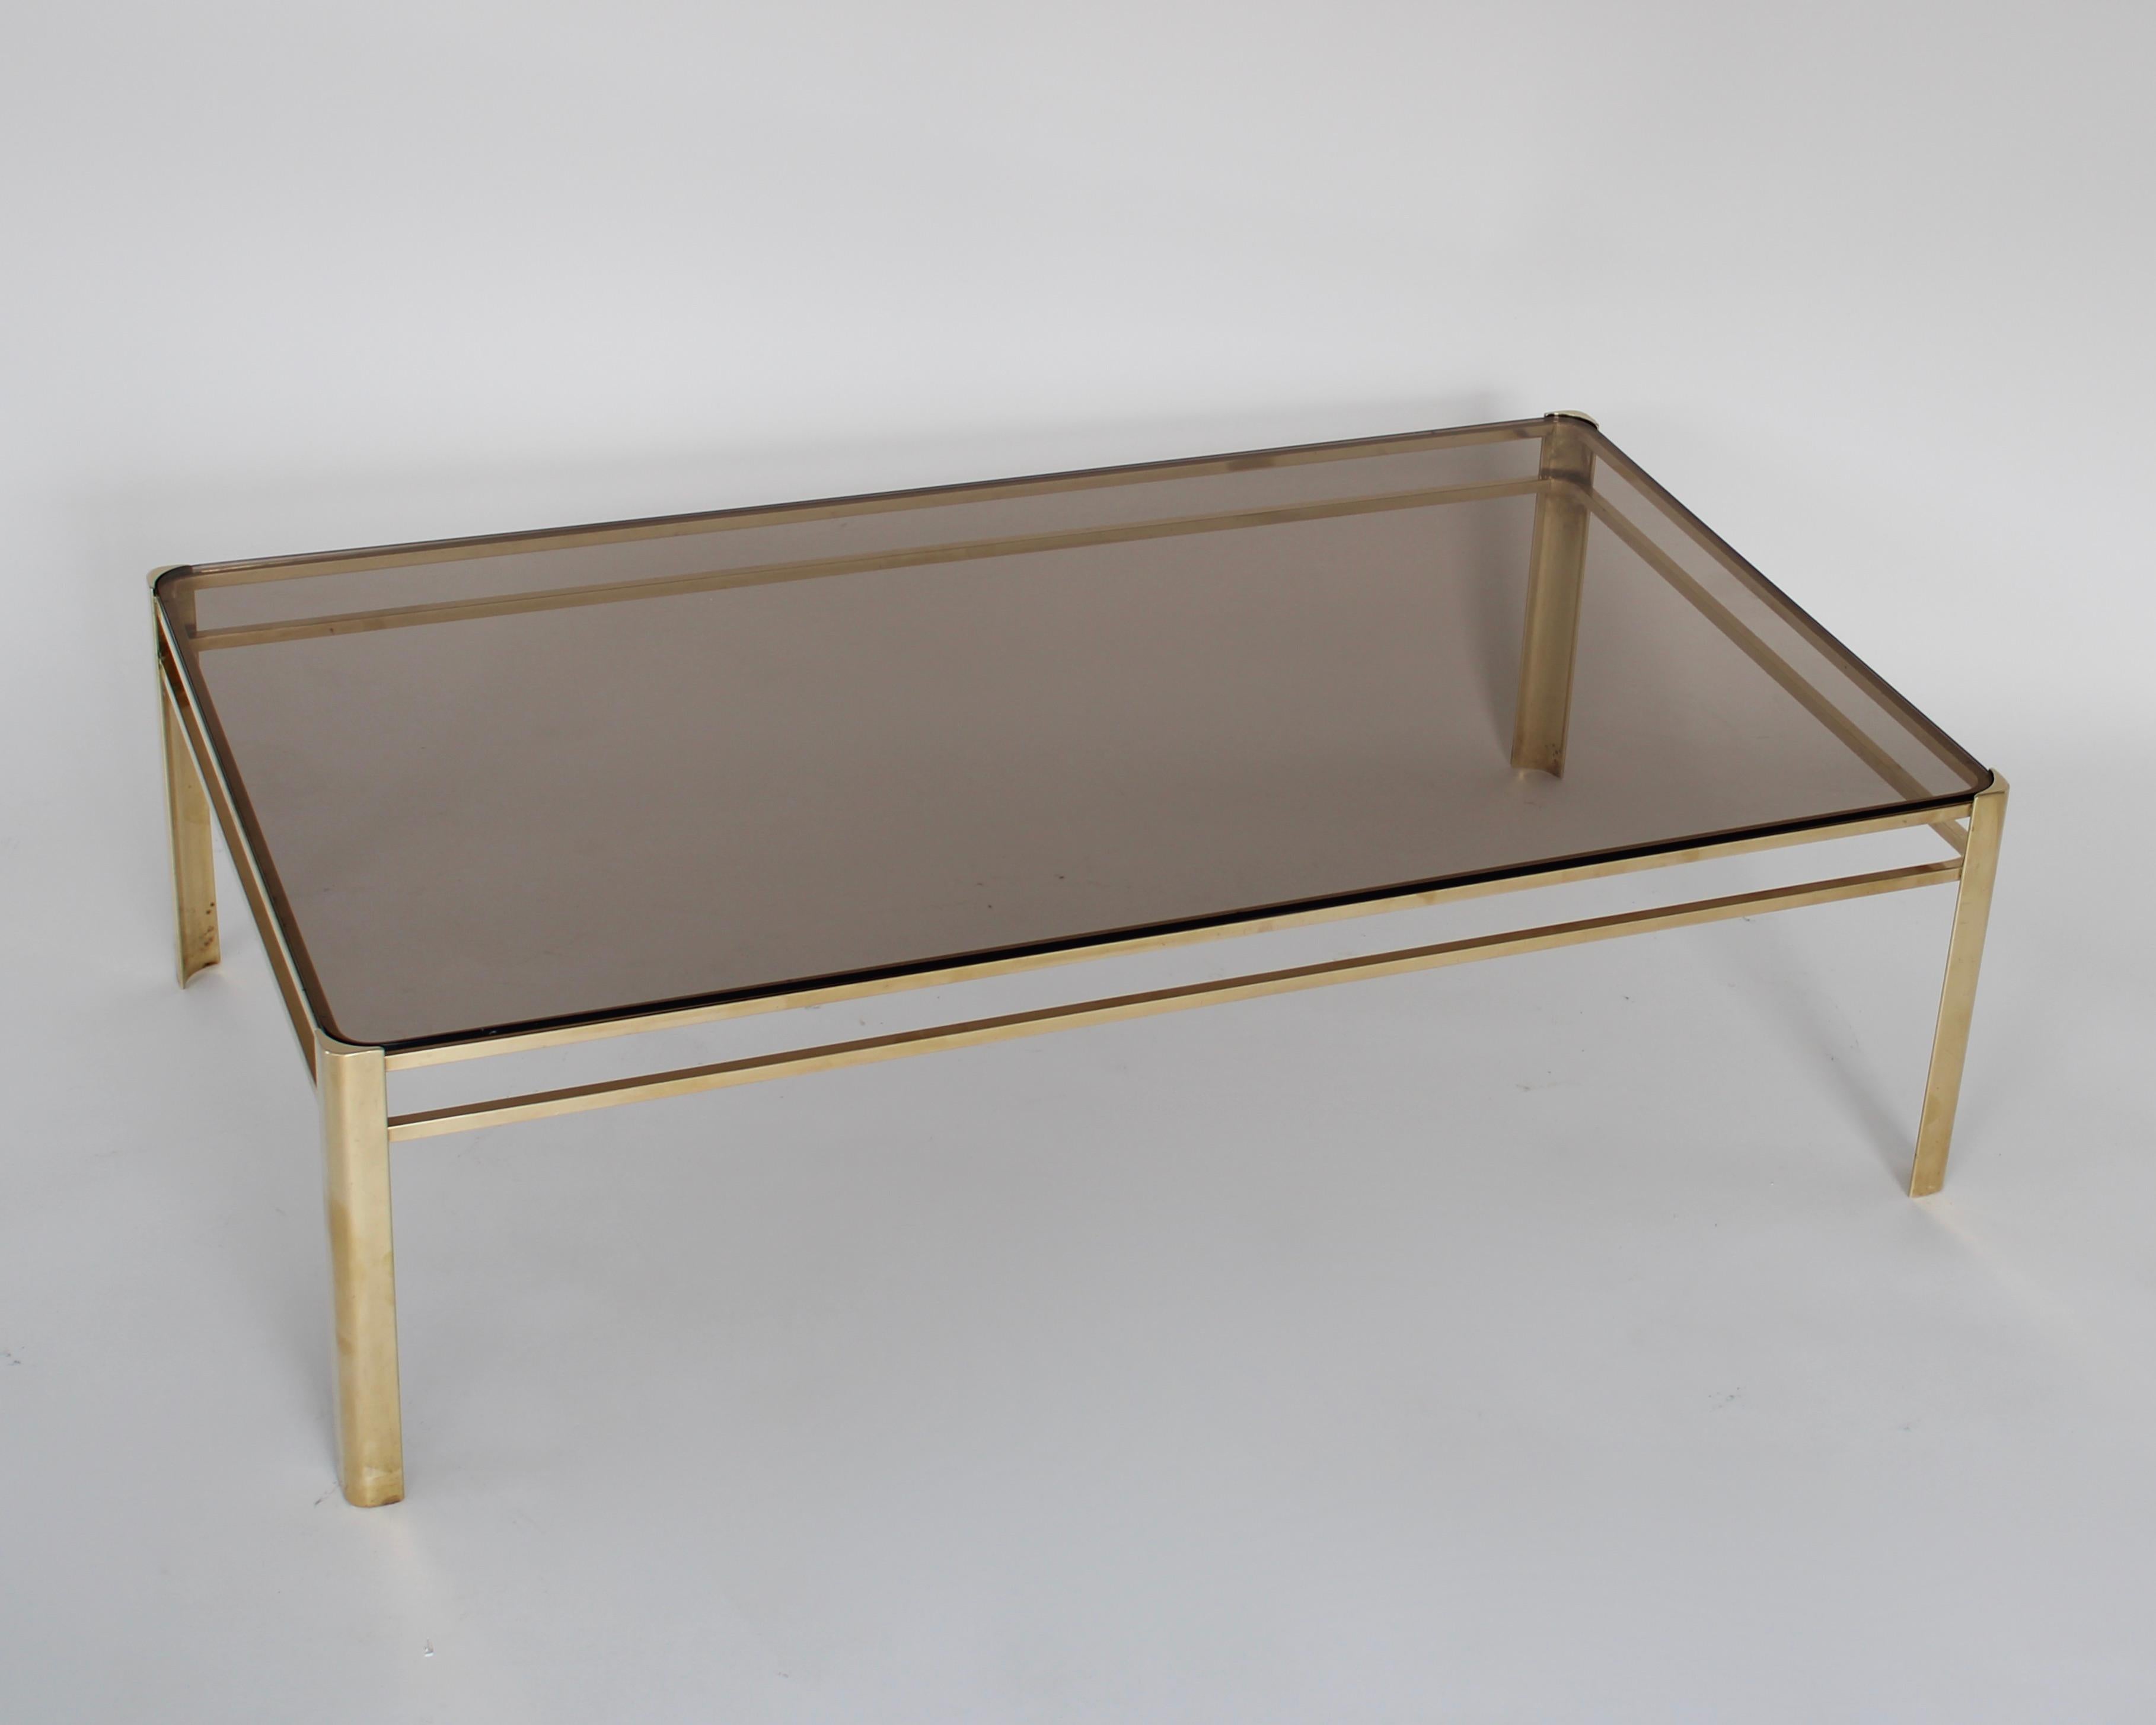 Bronze and Glass Coffee Cocktail Table by Jacques Quinet for Maison Malabart 1